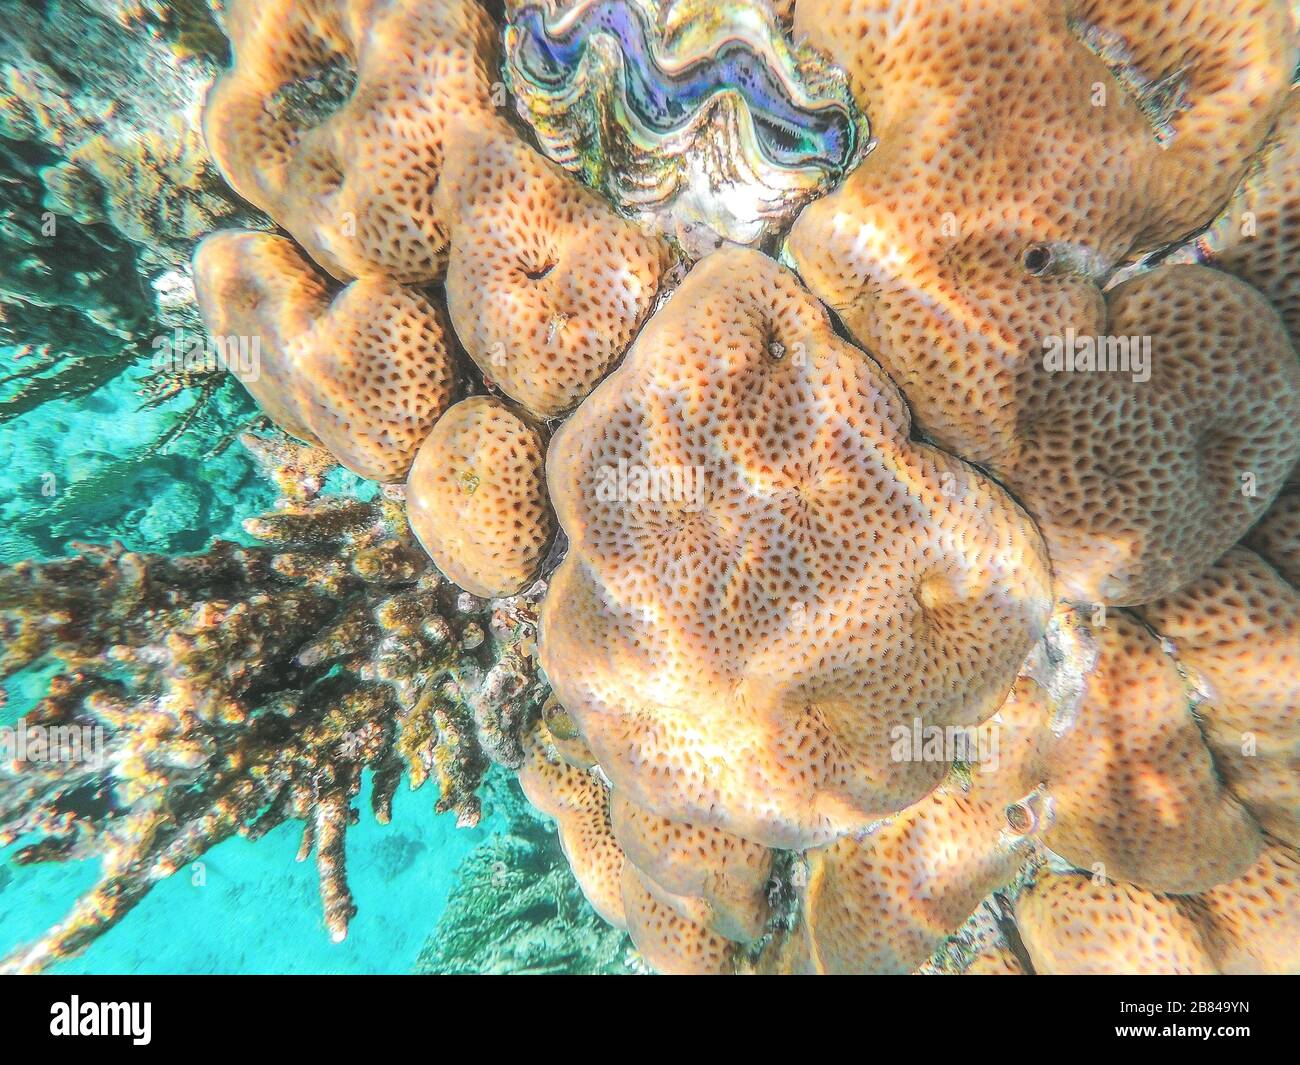 On a coral reef in the Red Sea, Egypt. Coral-brain, with its convolutions reminiscent of the convolutions of the brain. Underwater shooting. Stock Photo